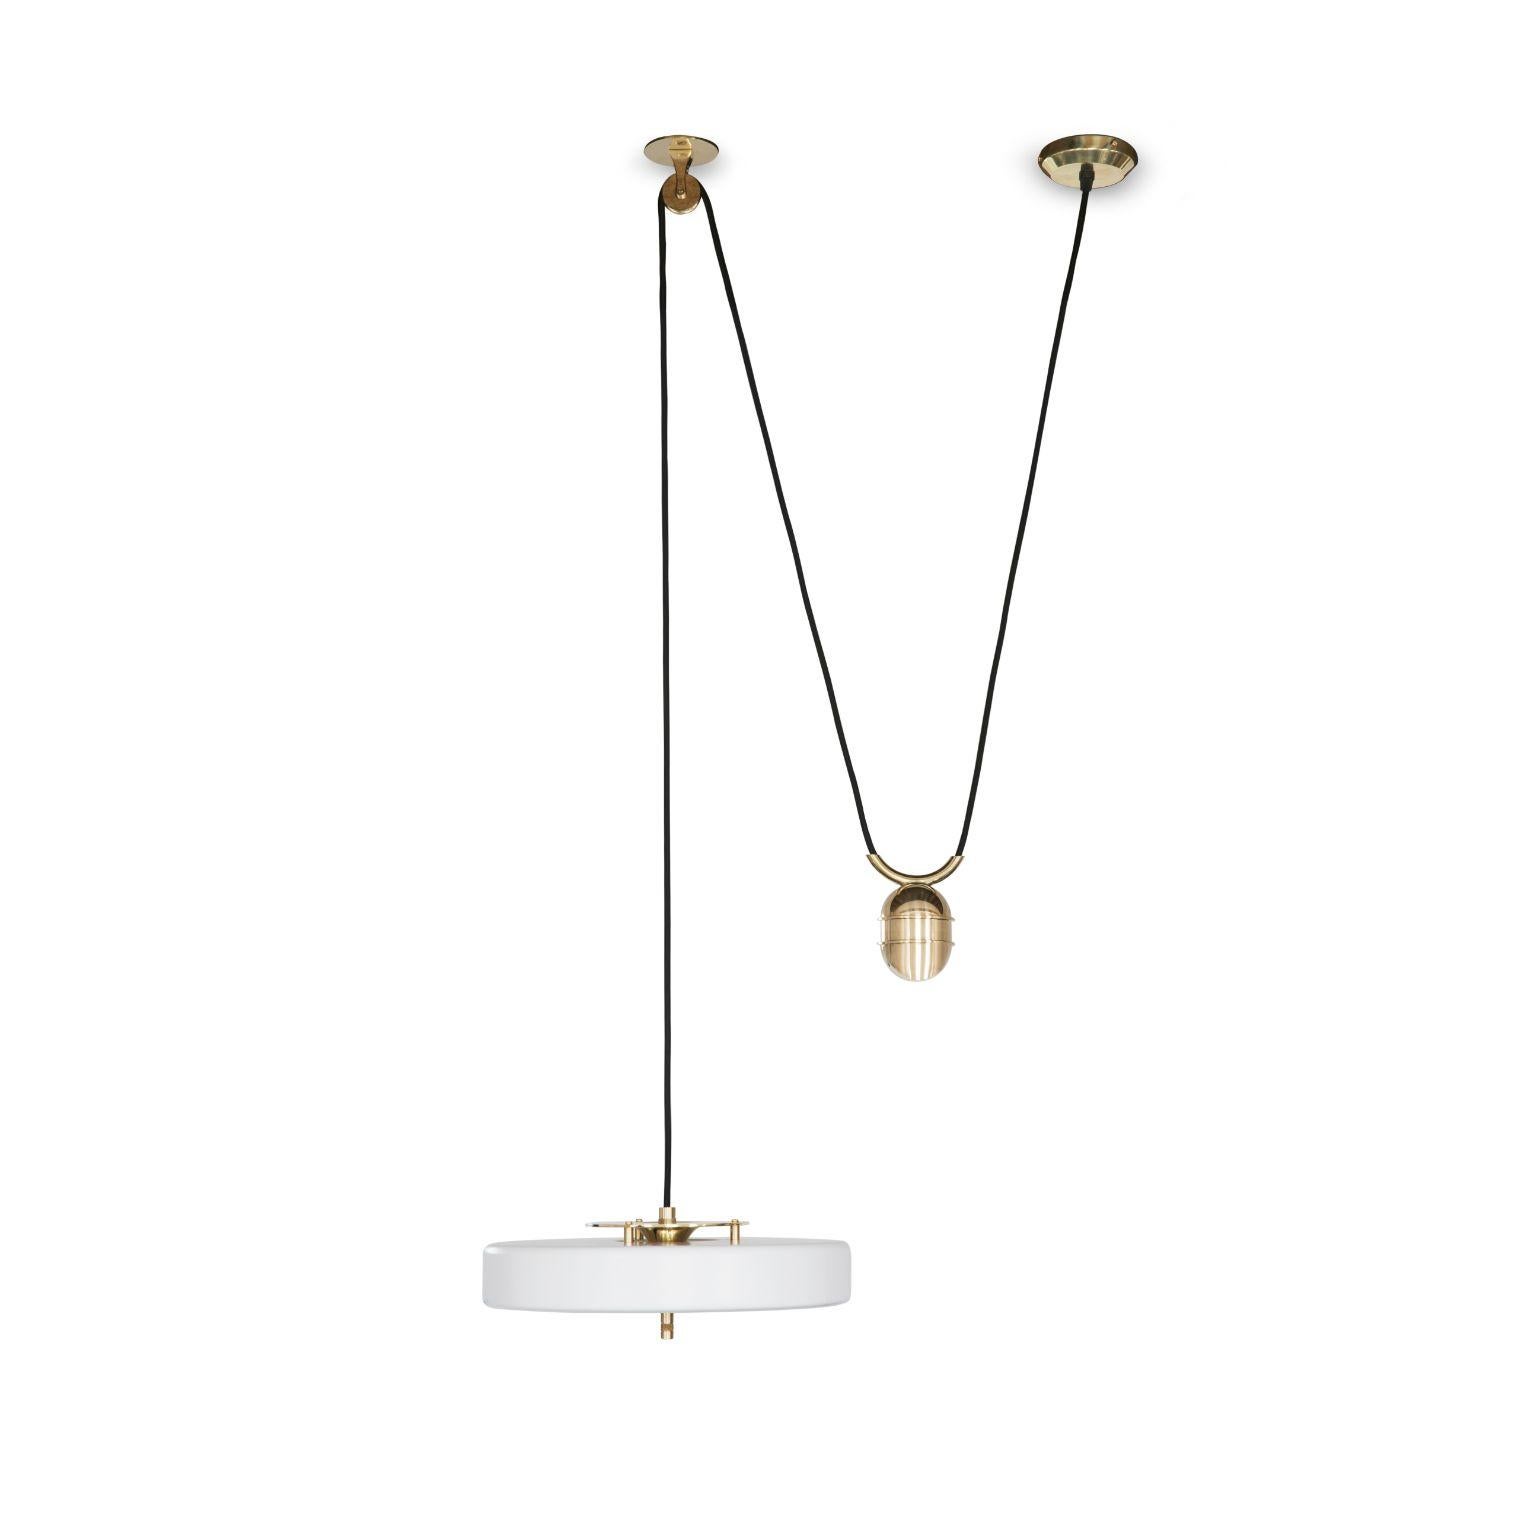 Revolve rise and fall pendant light - brushed brass - white by Bert Frank
Dimensions: 30 x 35 x 11 cm, small lamp 7.6 cm
Materials: Brass, steel

Also available in polished brass
When Adam Yeats and Robbie Llewellyn founded Bert Frank in 2013